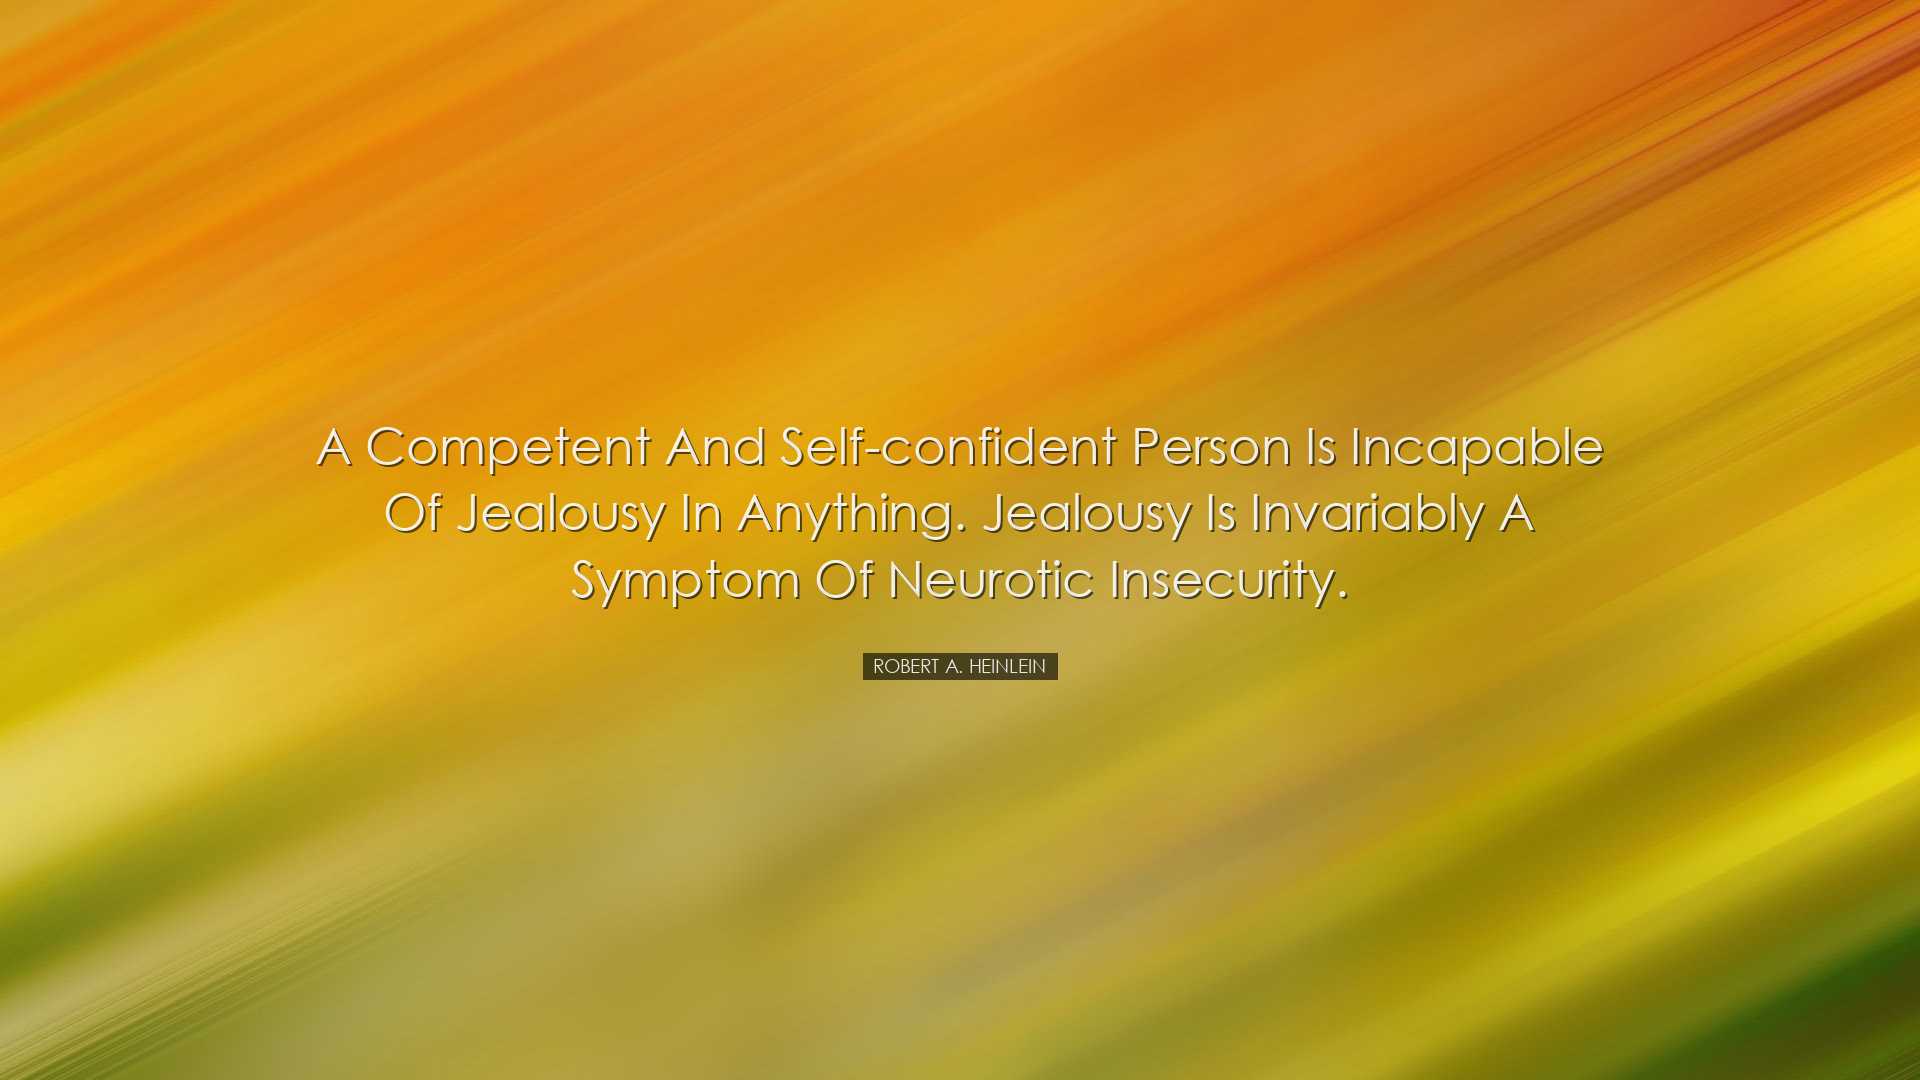 A competent and self-confident person is incapable of jealousy in